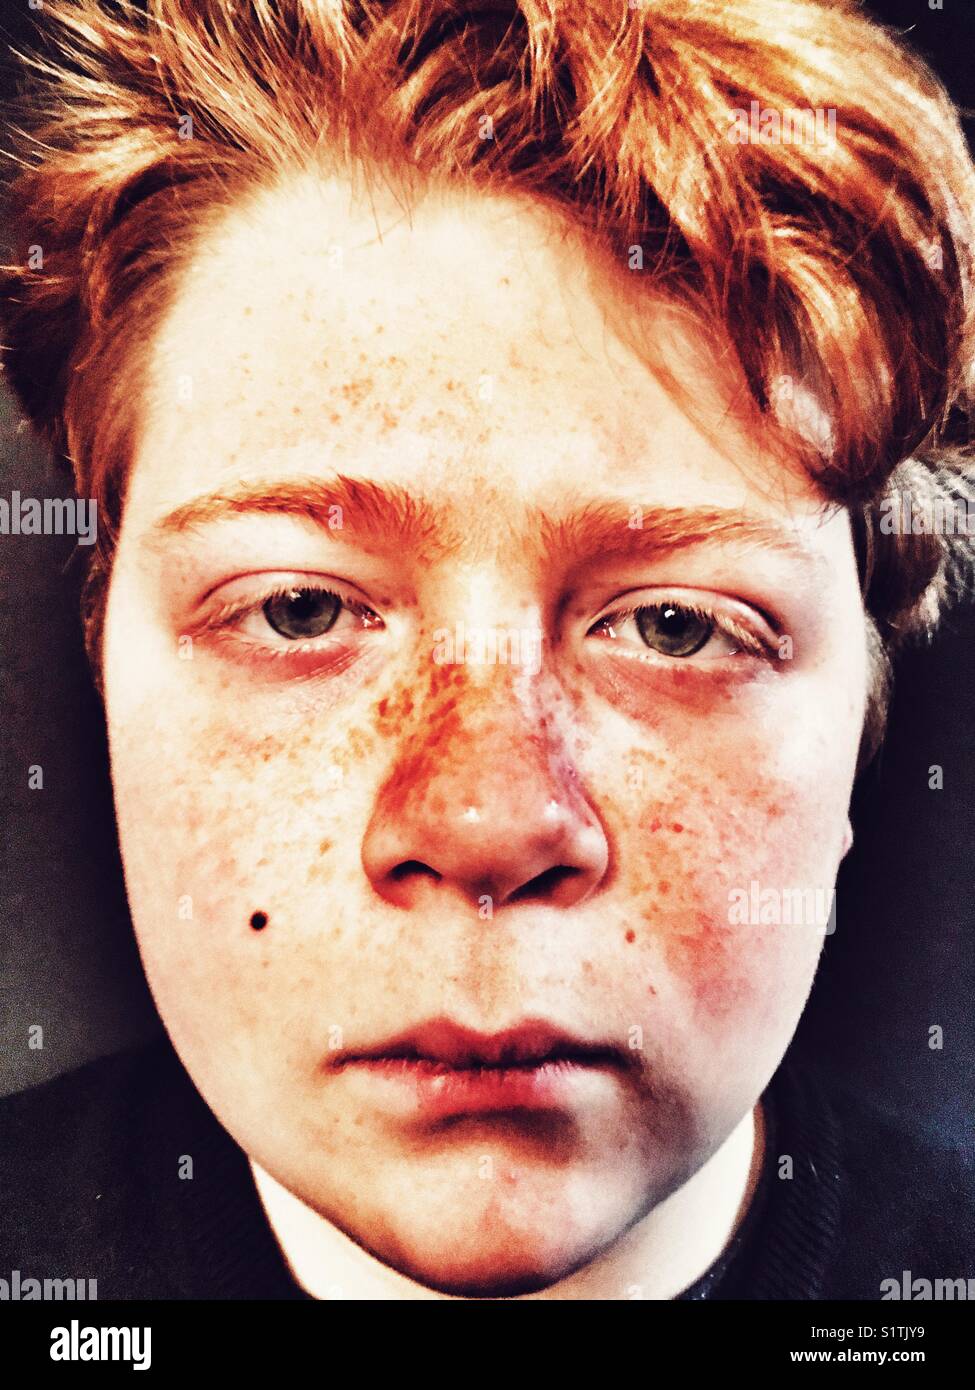 Boy with freckles Stock Photo